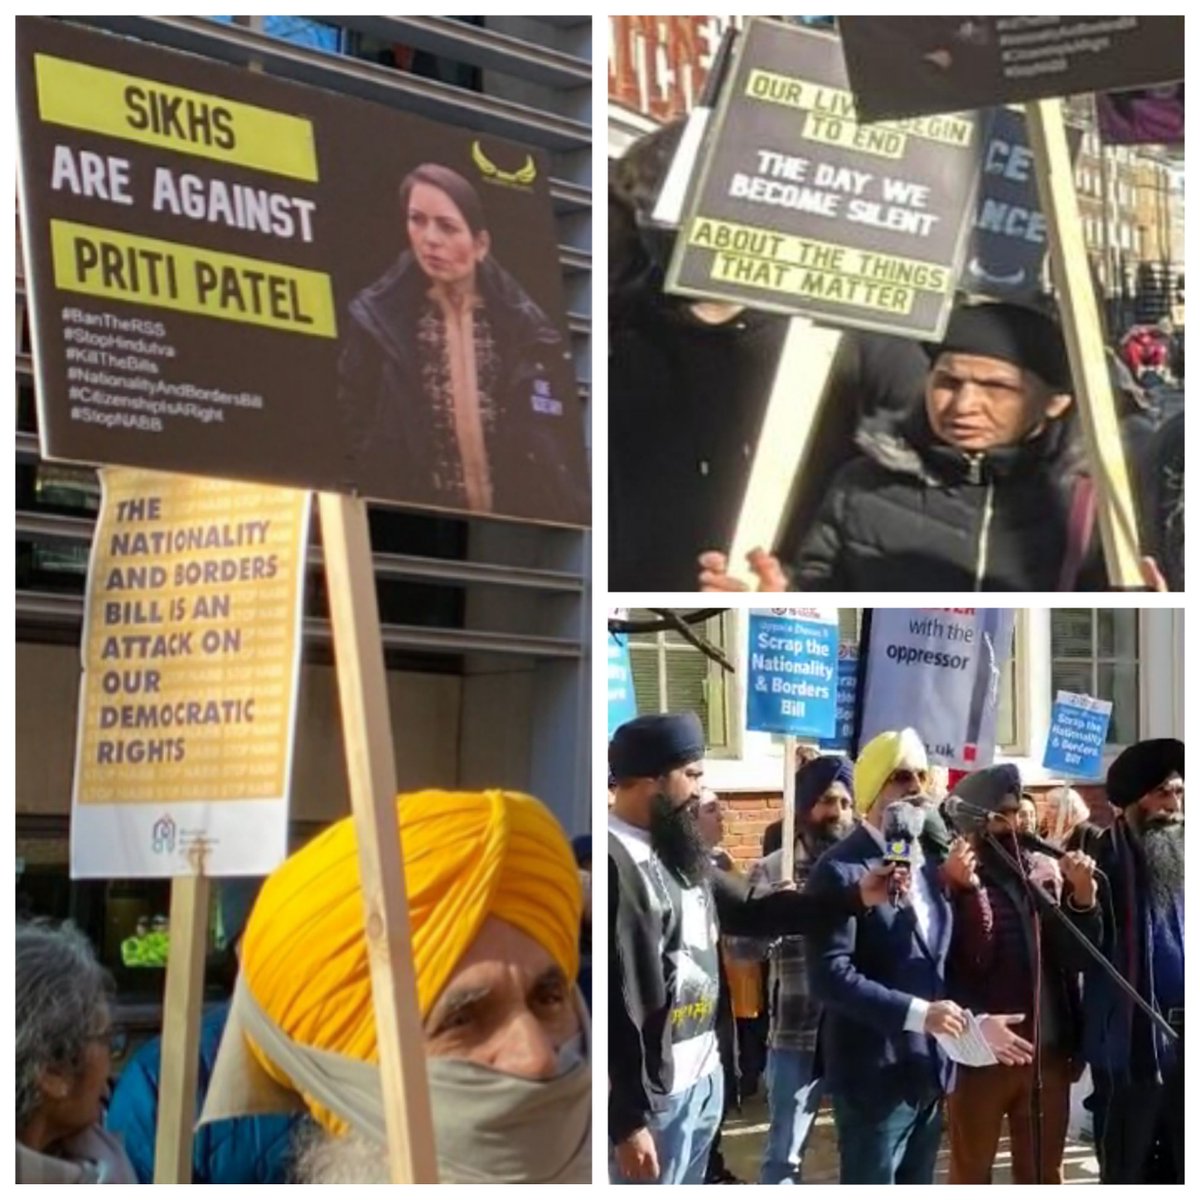 Thousands attended the protest today against the #NationalityandBordersBill

Here are some pictures taken from the protest

Look forward to attending more protests with @LetsStopC9 and others 🙏

#BanTheRSS
#KillTheBills
#CitizenshipIsARight
#STOPNABB 
#BordersBill
#StopHindutva